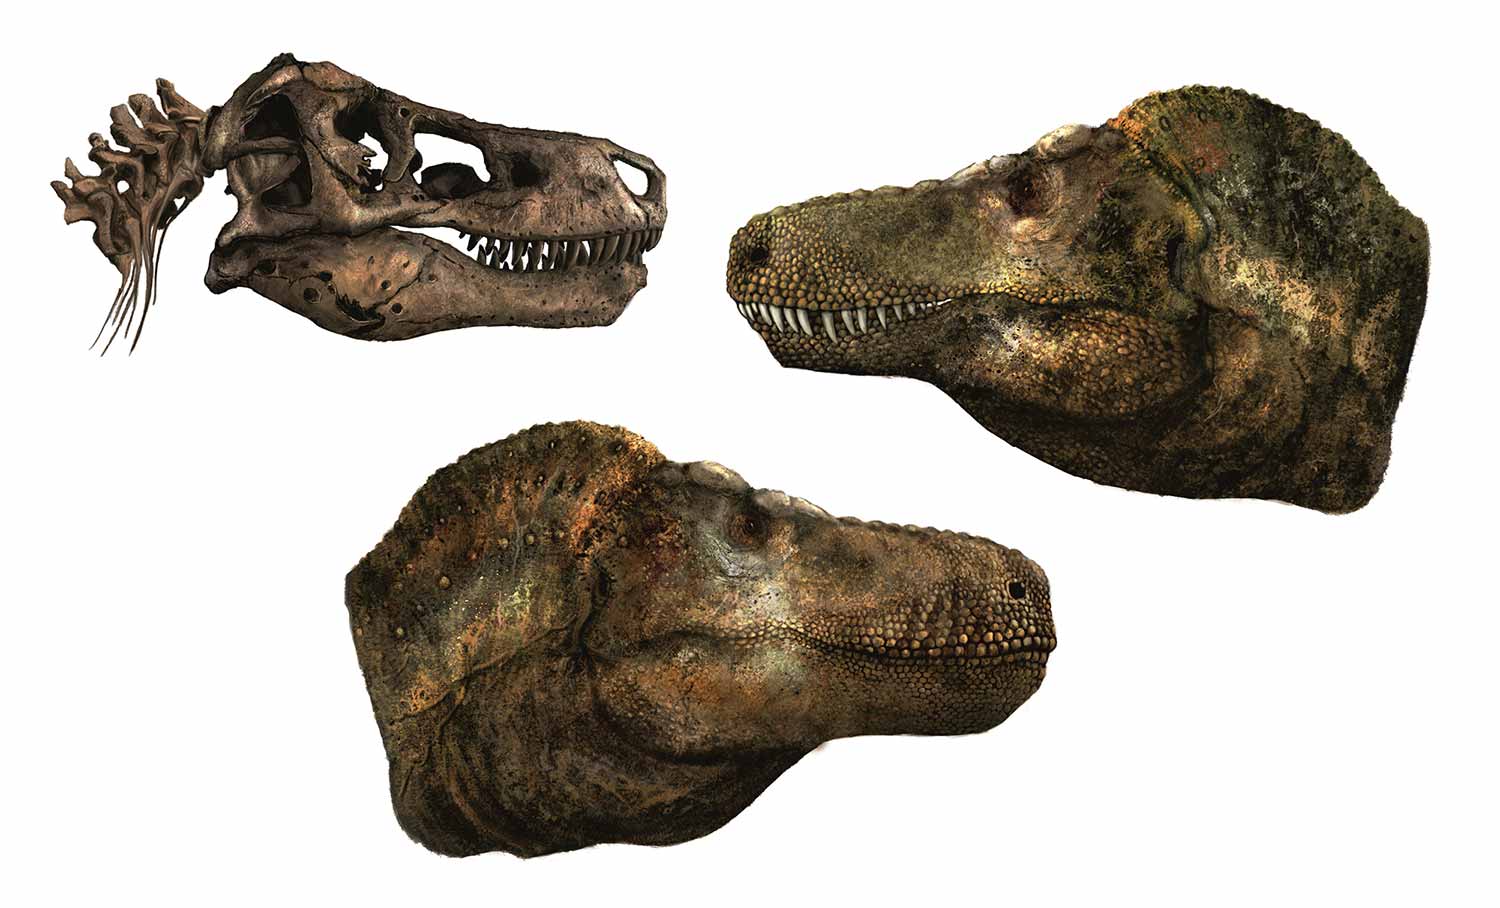 A T. rex skull, a T. rex head with teeth exposed, and a T. rex head with lips covering its teeth.